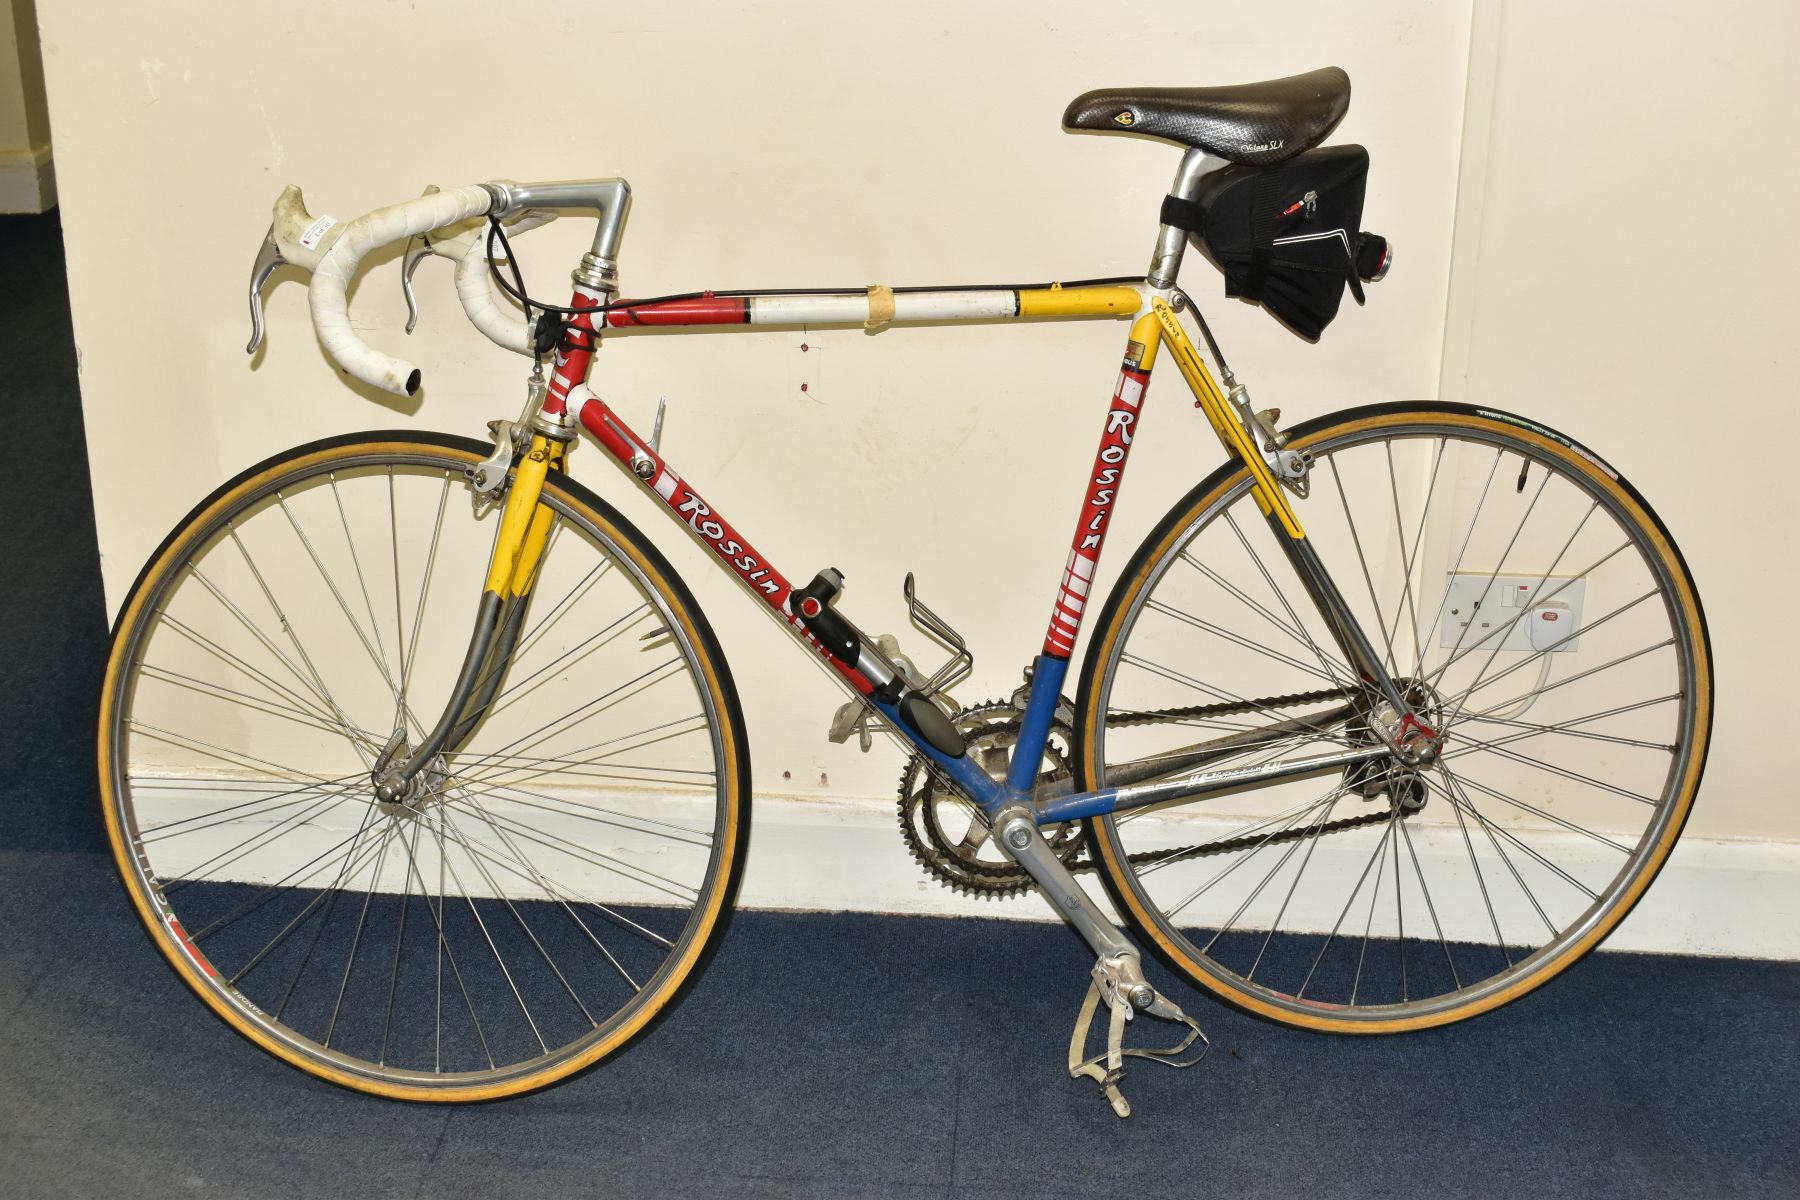 A VINTAGE ROSSIN RACING BICYCLE CIRCA 1980s, fitted with a Campagnolo front crank set and chain - Bild 9 aus 14